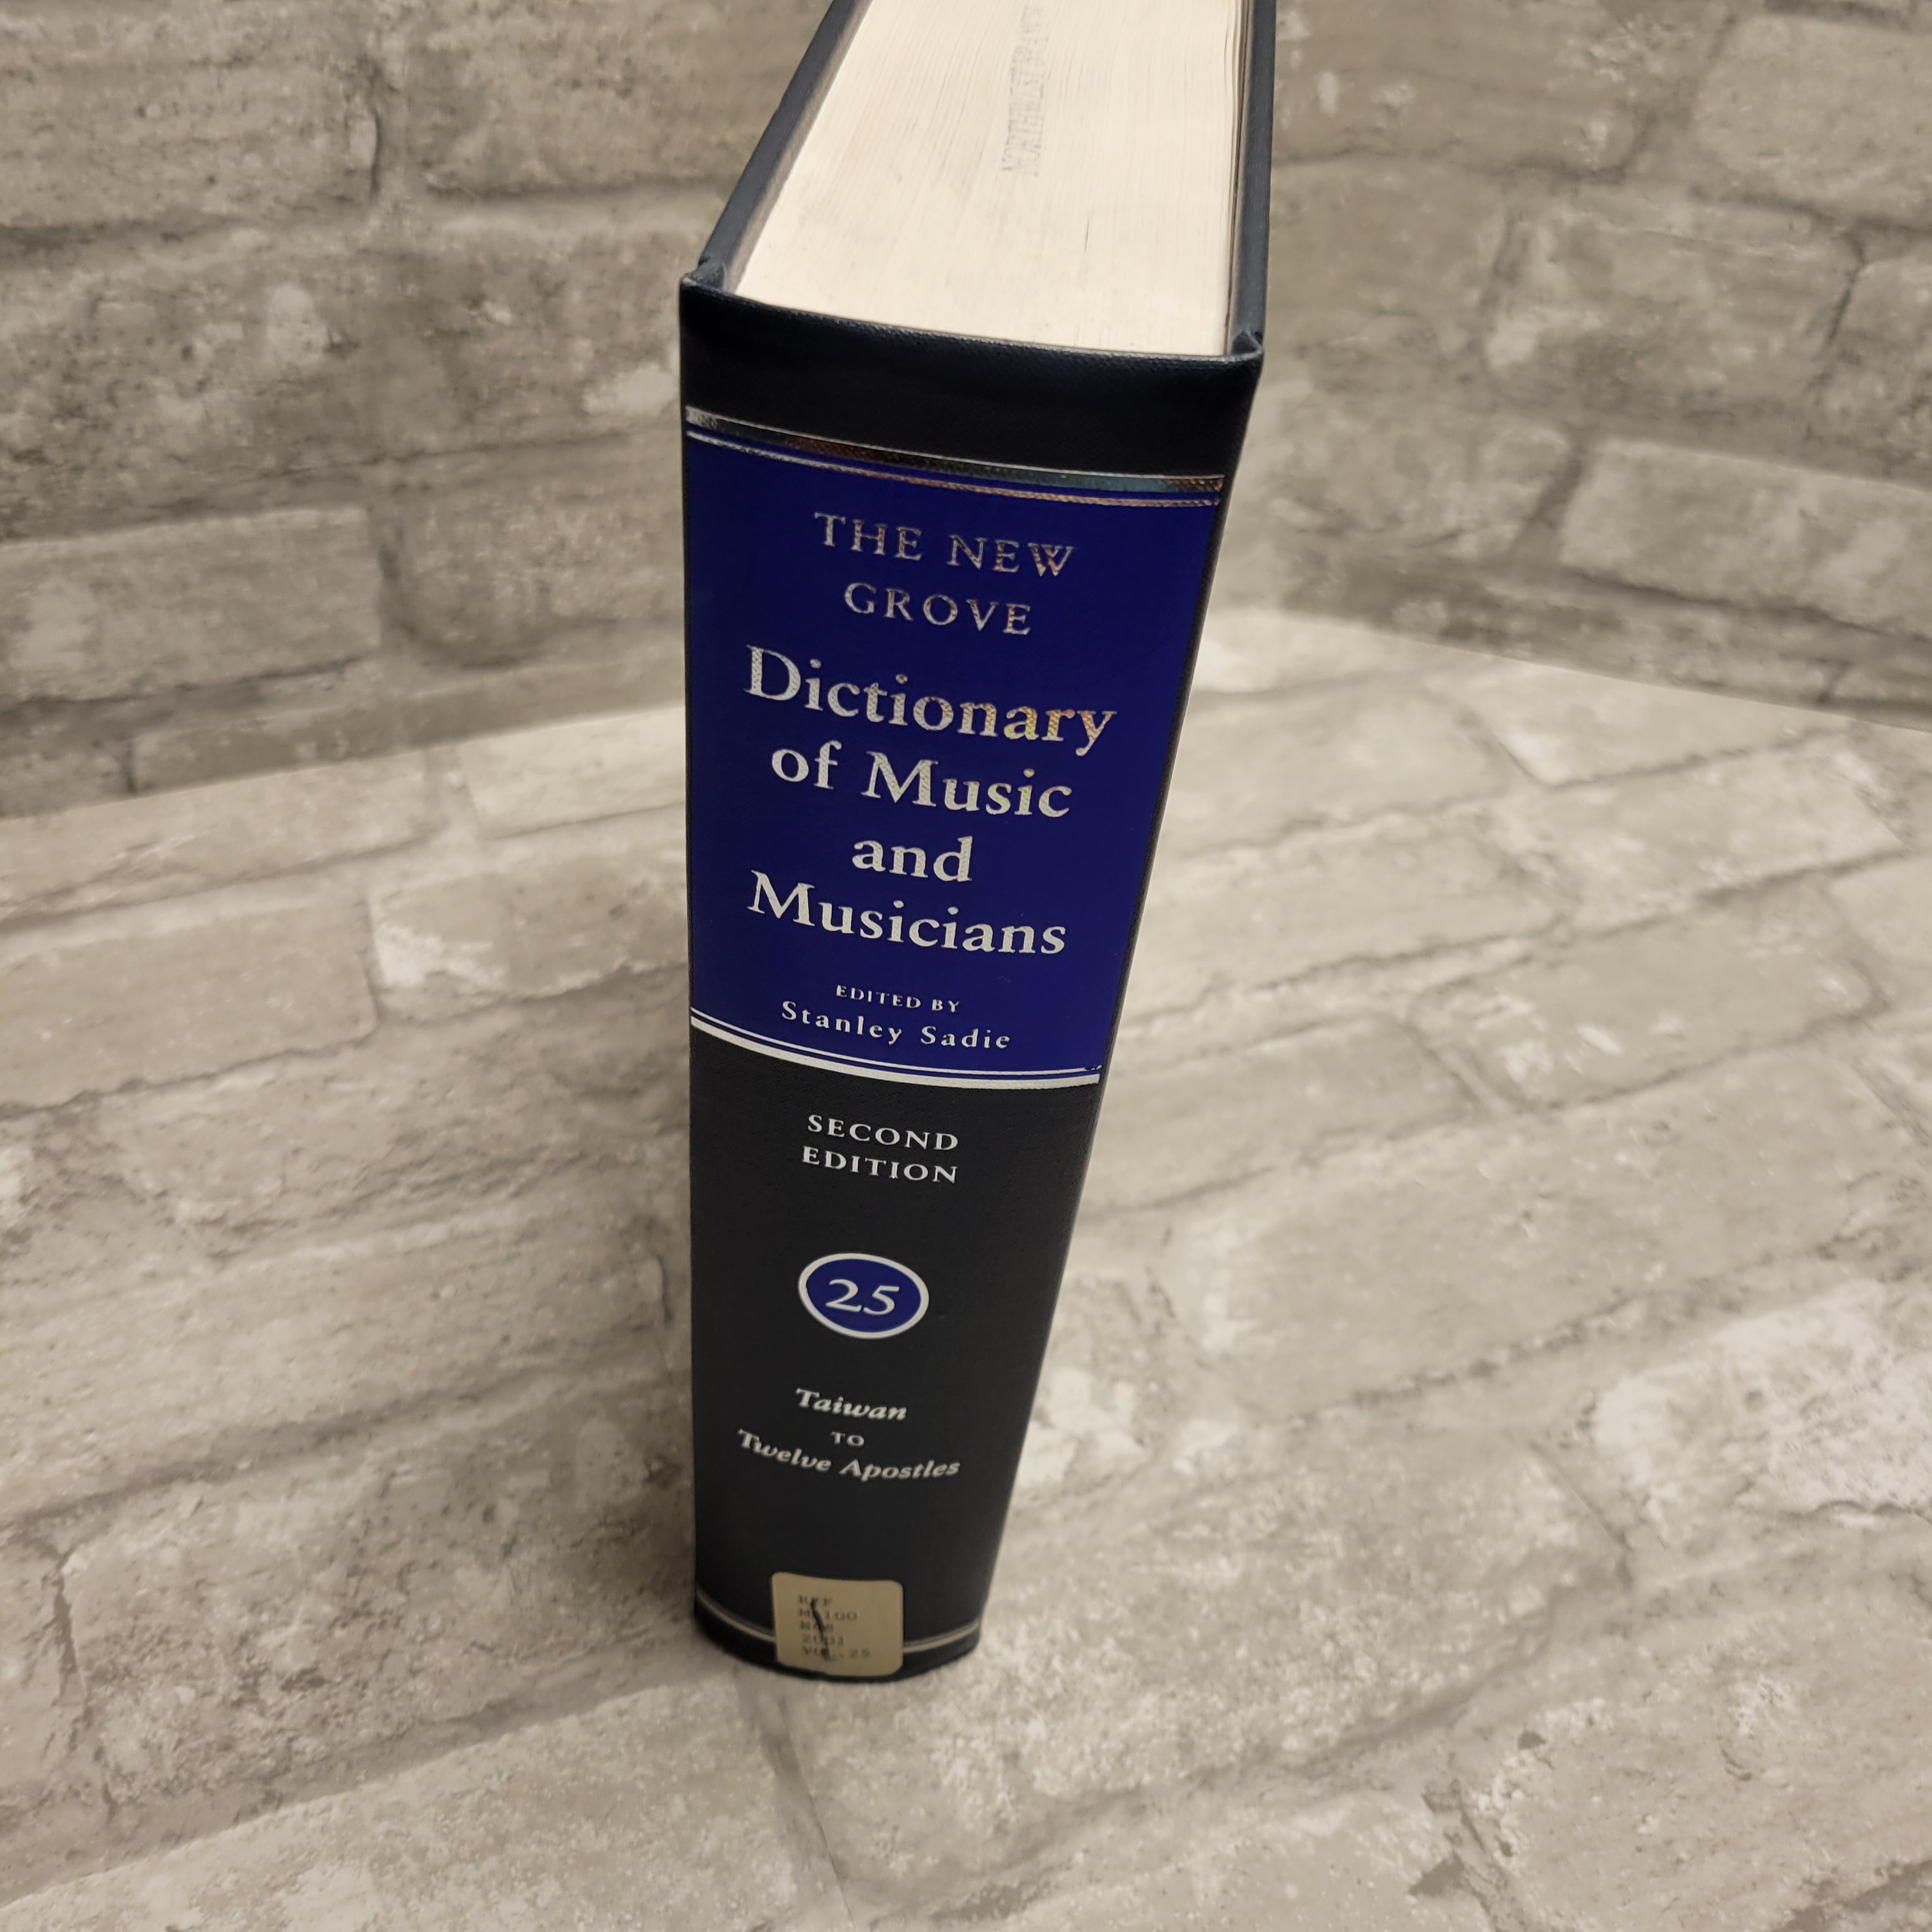 The New Grove Dictionary of Music and Musicians, 2nd Ed, Vol 25 (8056494751982)